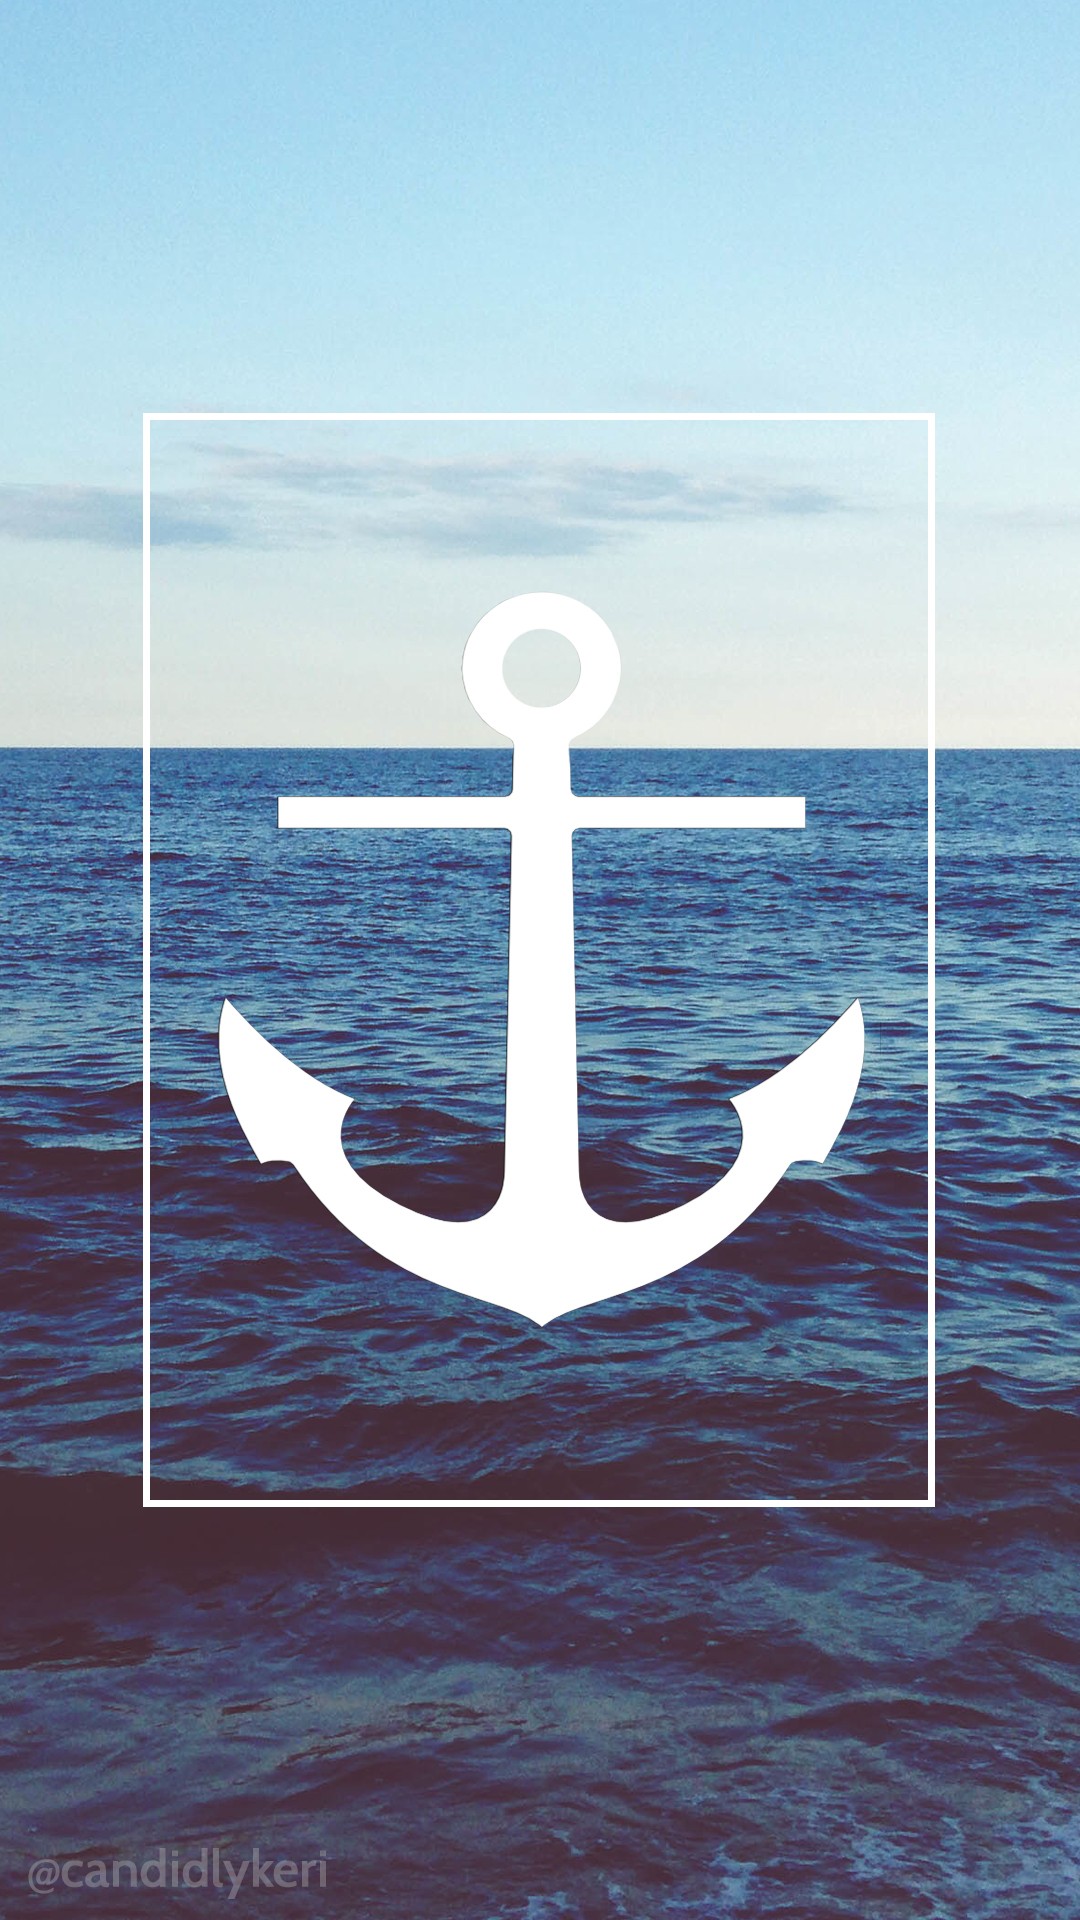 Anchor wallpaper ·① Download free HD wallpapers for desktop and mobile